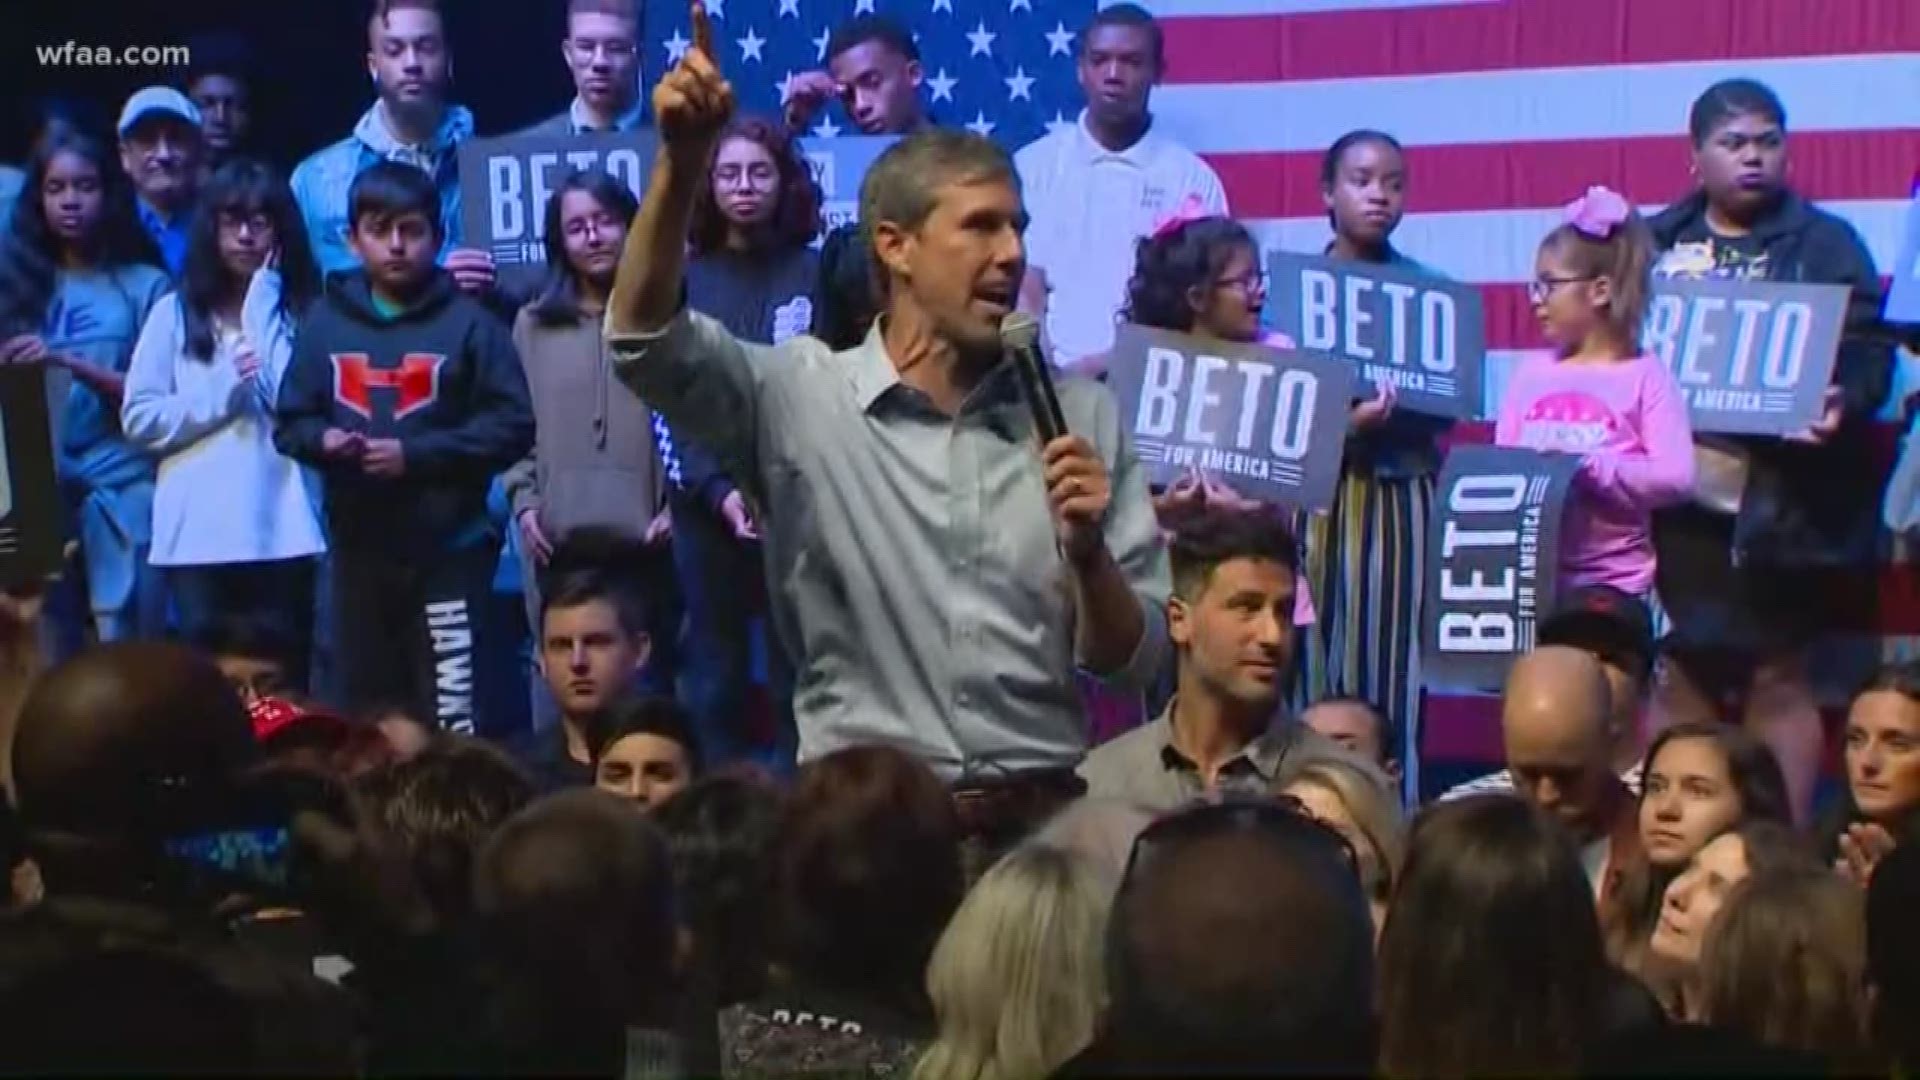 Hundreds of supporters filled the seats of the Theatre in Grand Prairie for Beto O'Rourke's "Rally Against Fear."